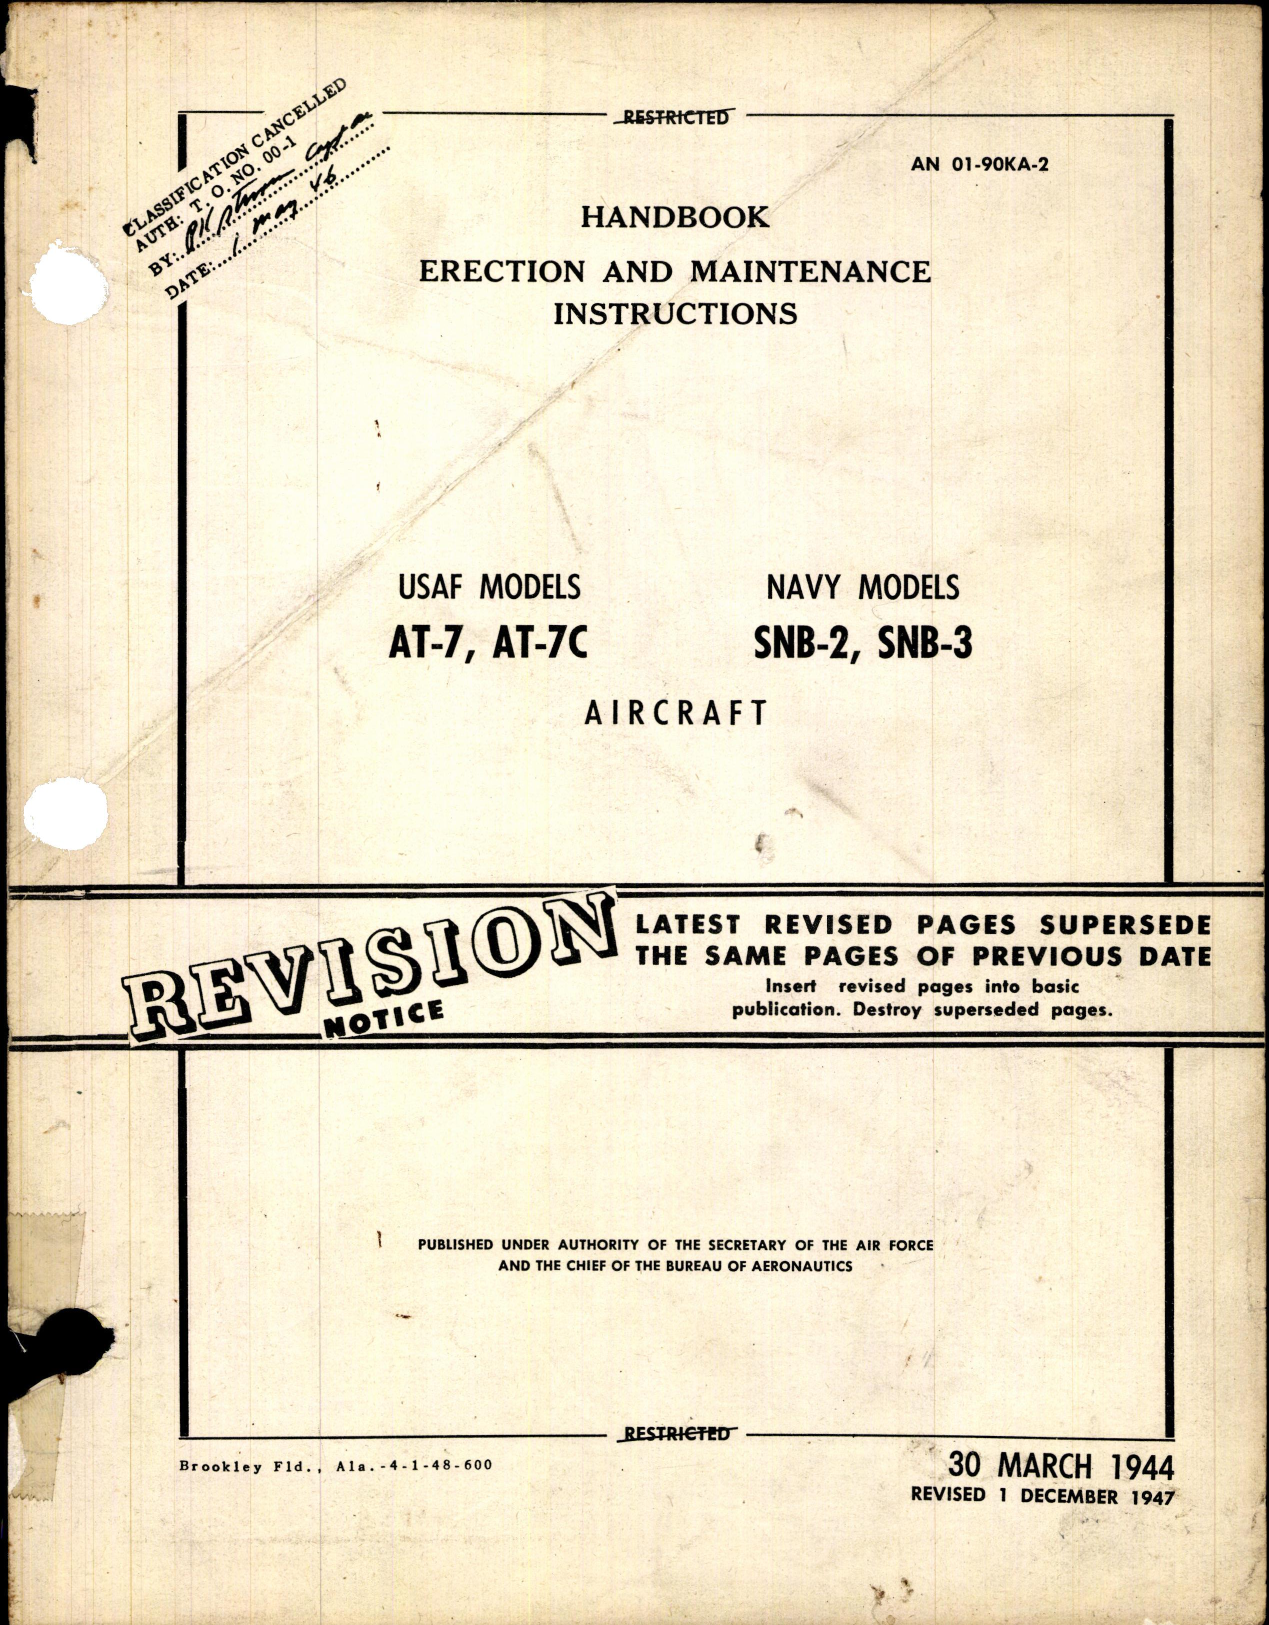 Sample page 1 from AirCorps Library document: Erection and Maintenance Instructions for AT-7, AT-7C, SNB-2, and SNB-3